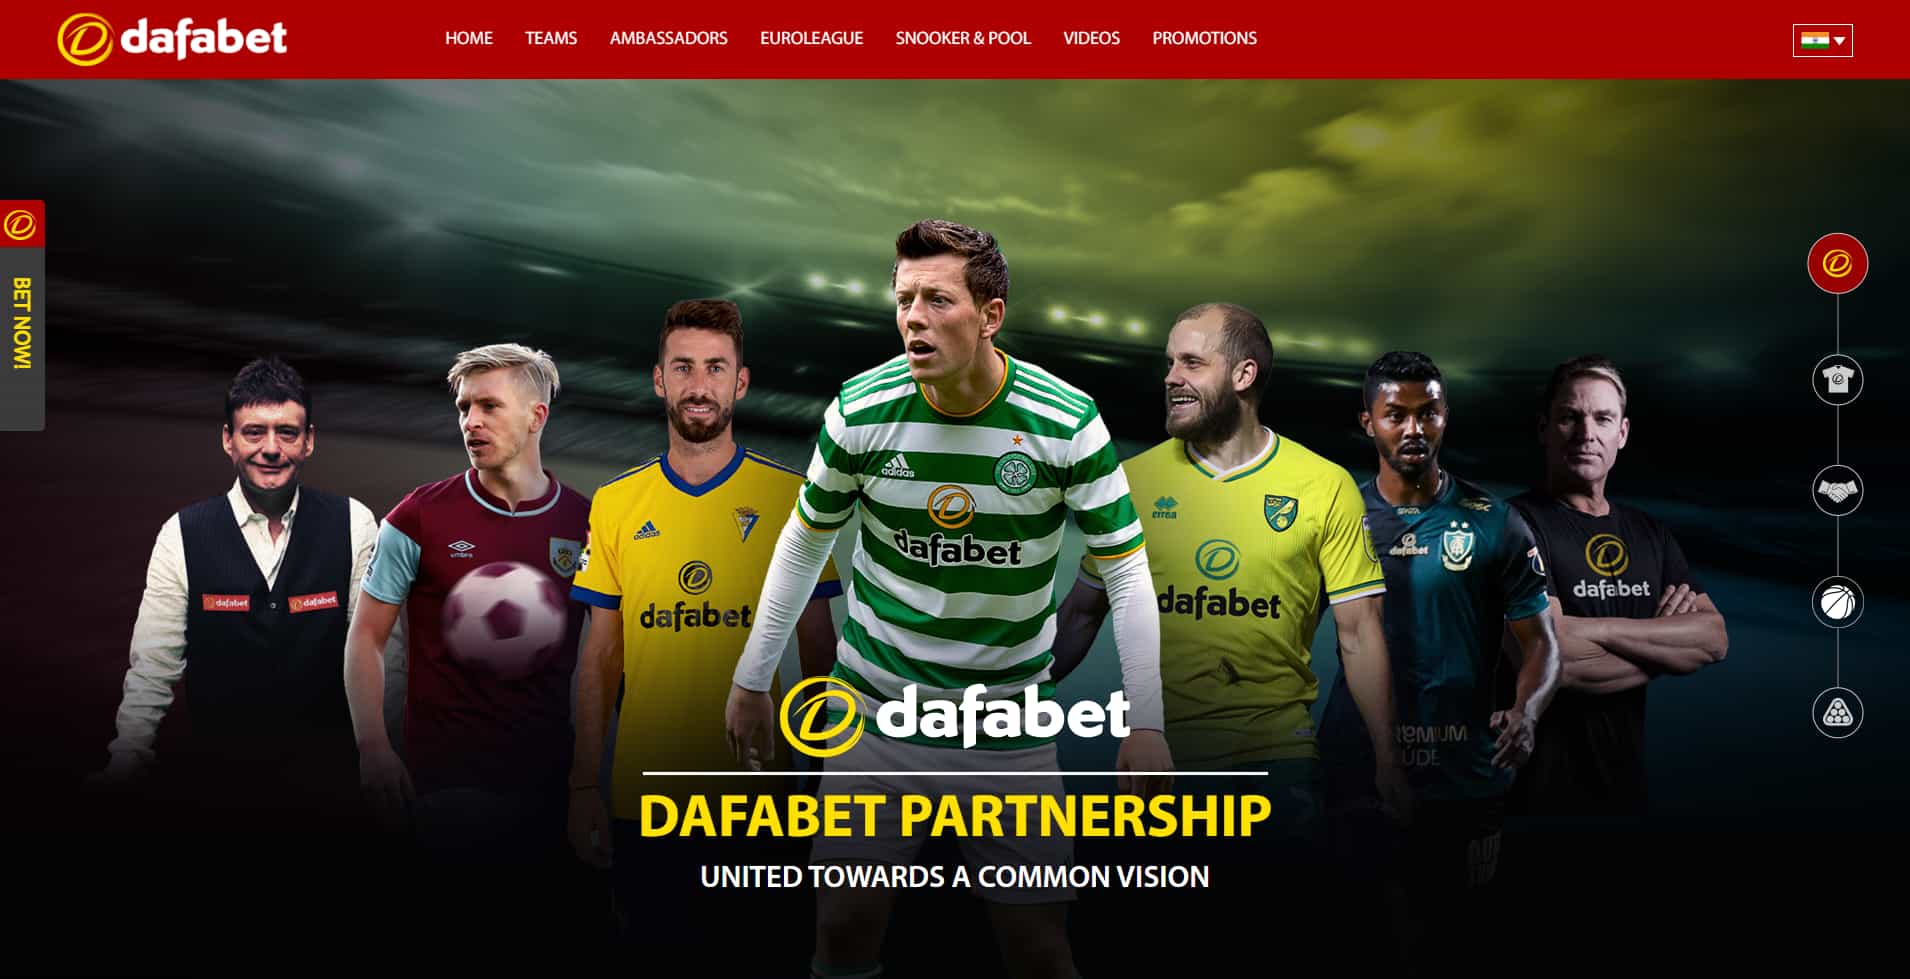 A Detailed Overview of Dafabet's Partnerships